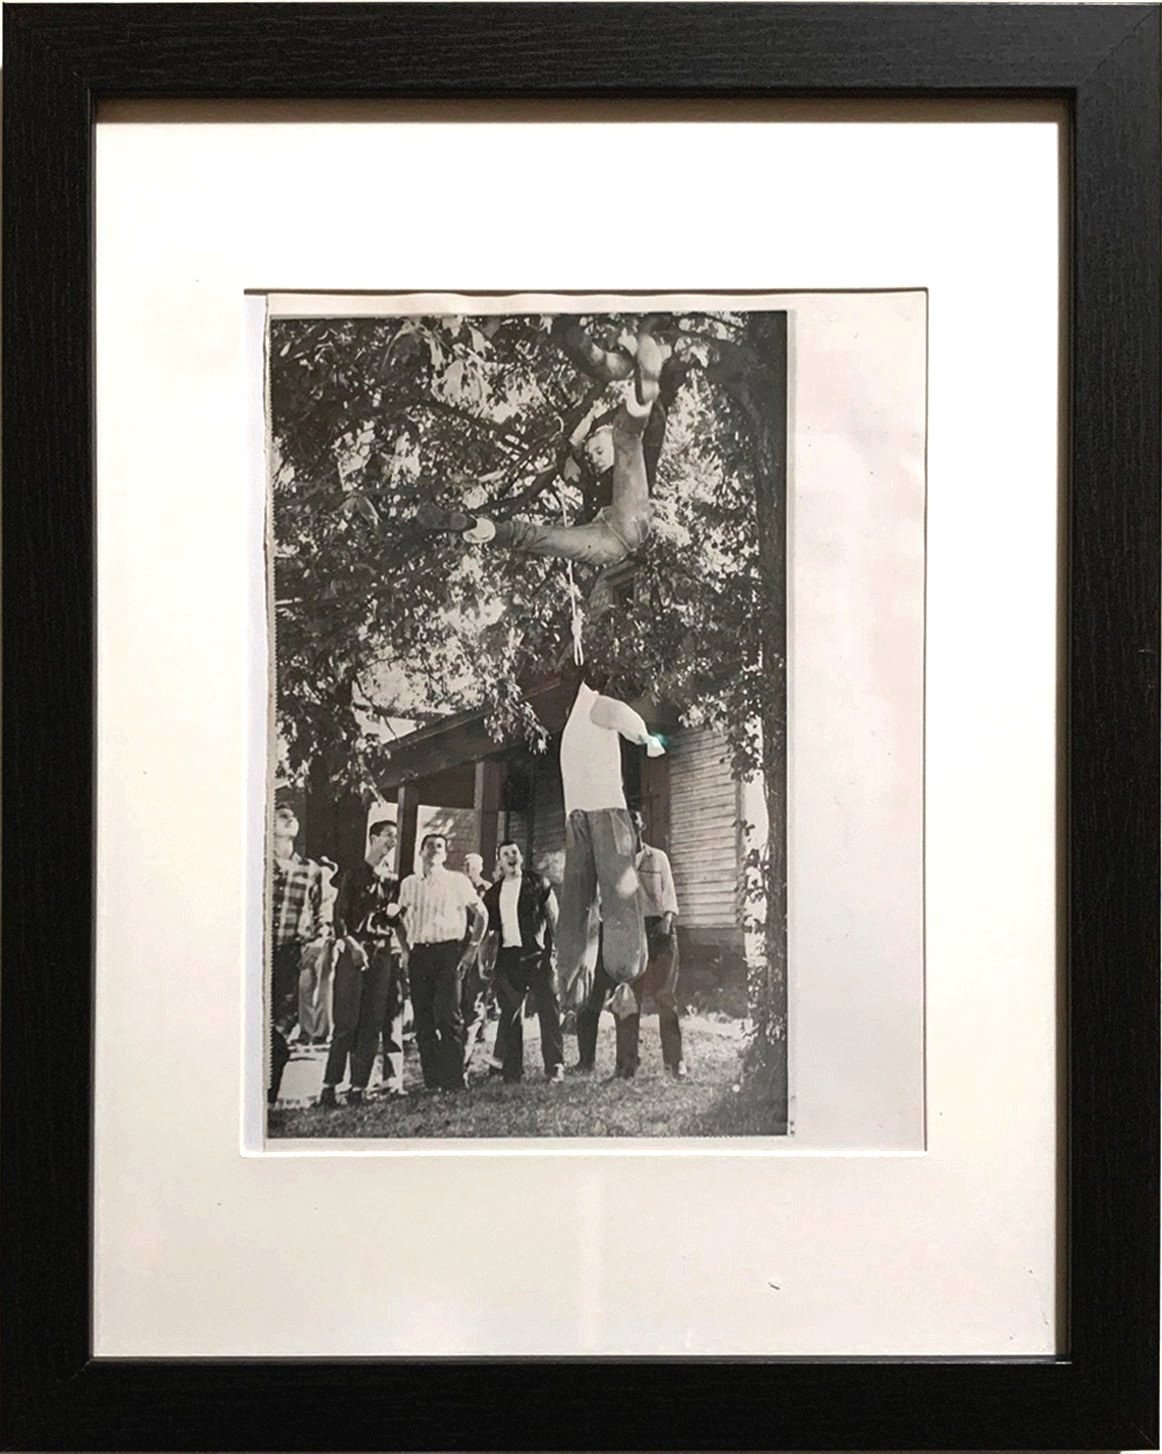 SOLD - 2. 10/4/57 – Black effigy hung in tree by Central High School students during the Central High School Crisis. (Note boy in mid-air jumping out of tree after hanging it) Little Rock, Arkansas